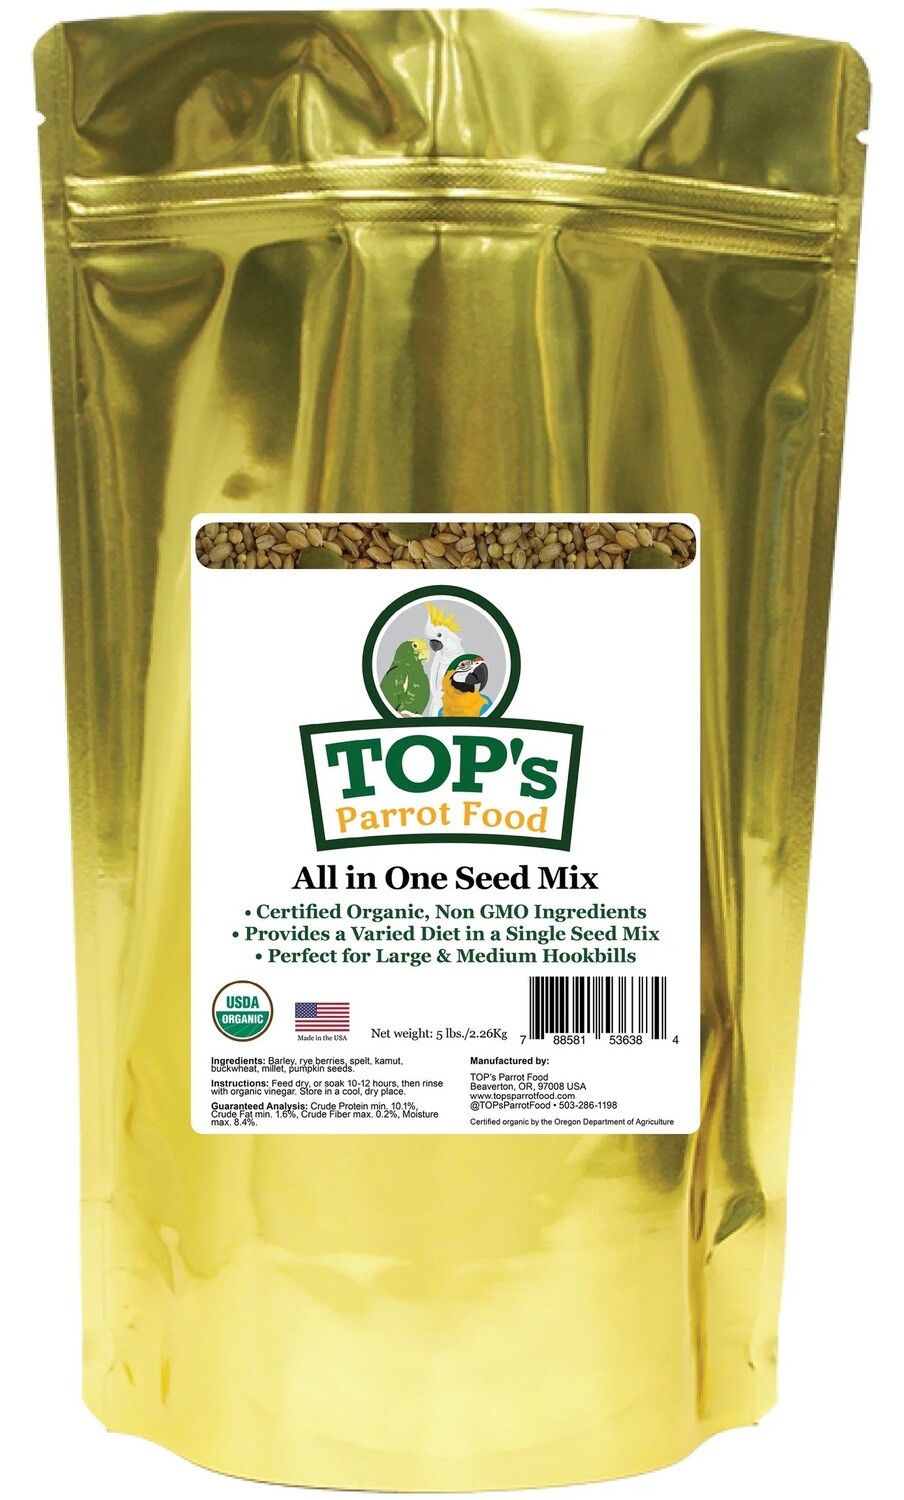 Tops Parrots Food 1 Lb USDA Organic All in One Seed Mix